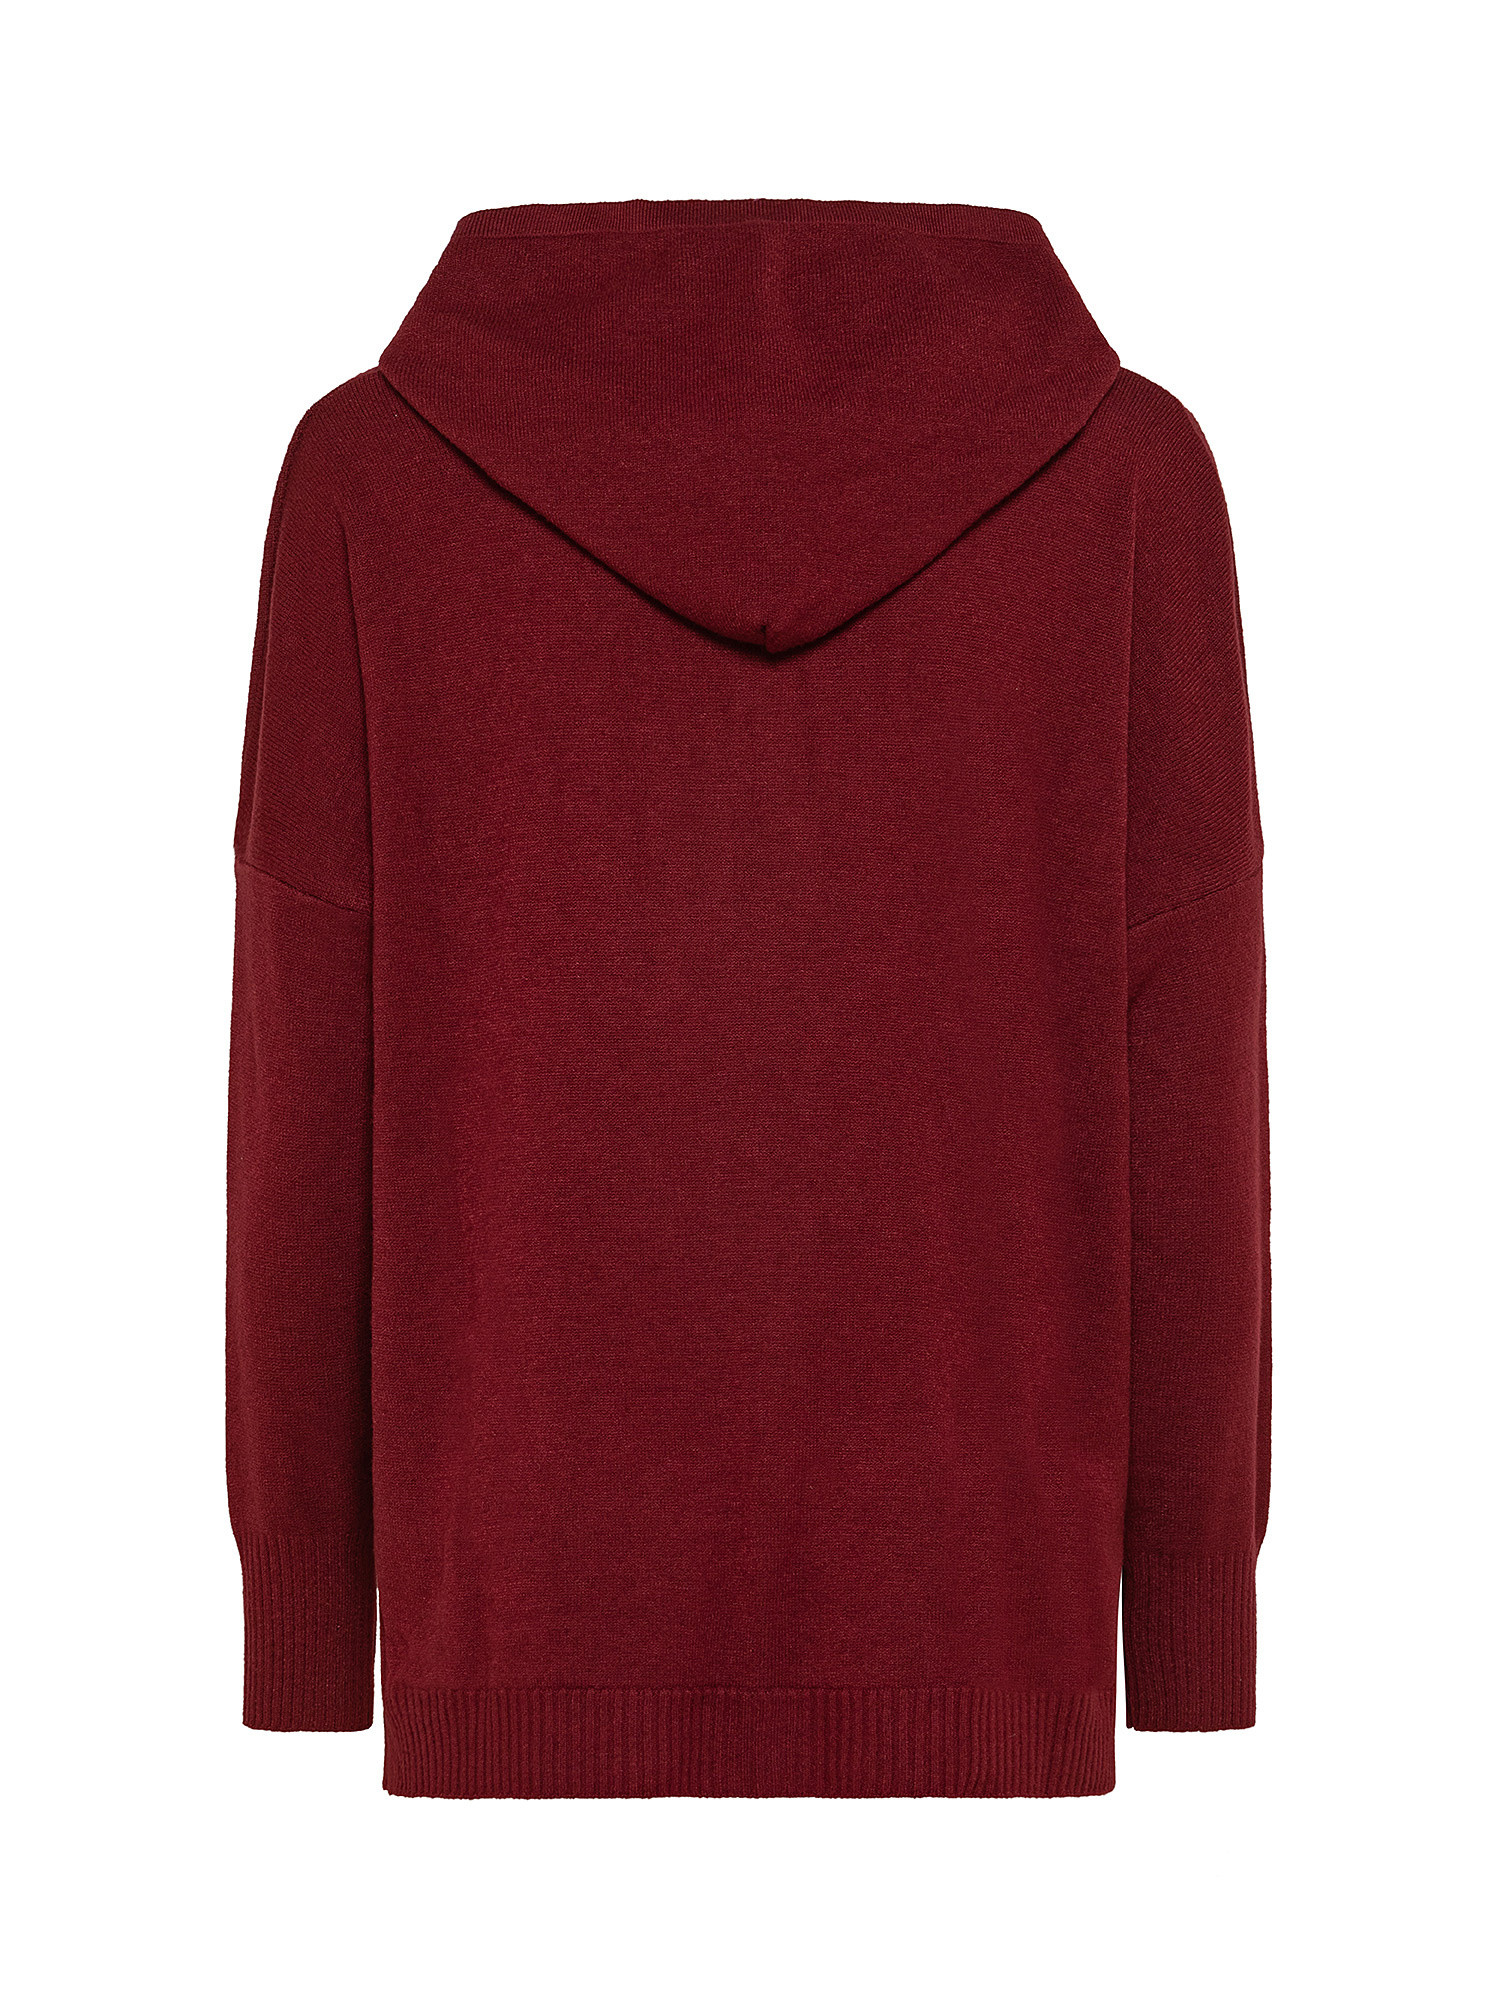 Oversized sweater with hood, Dark Red, large image number 1